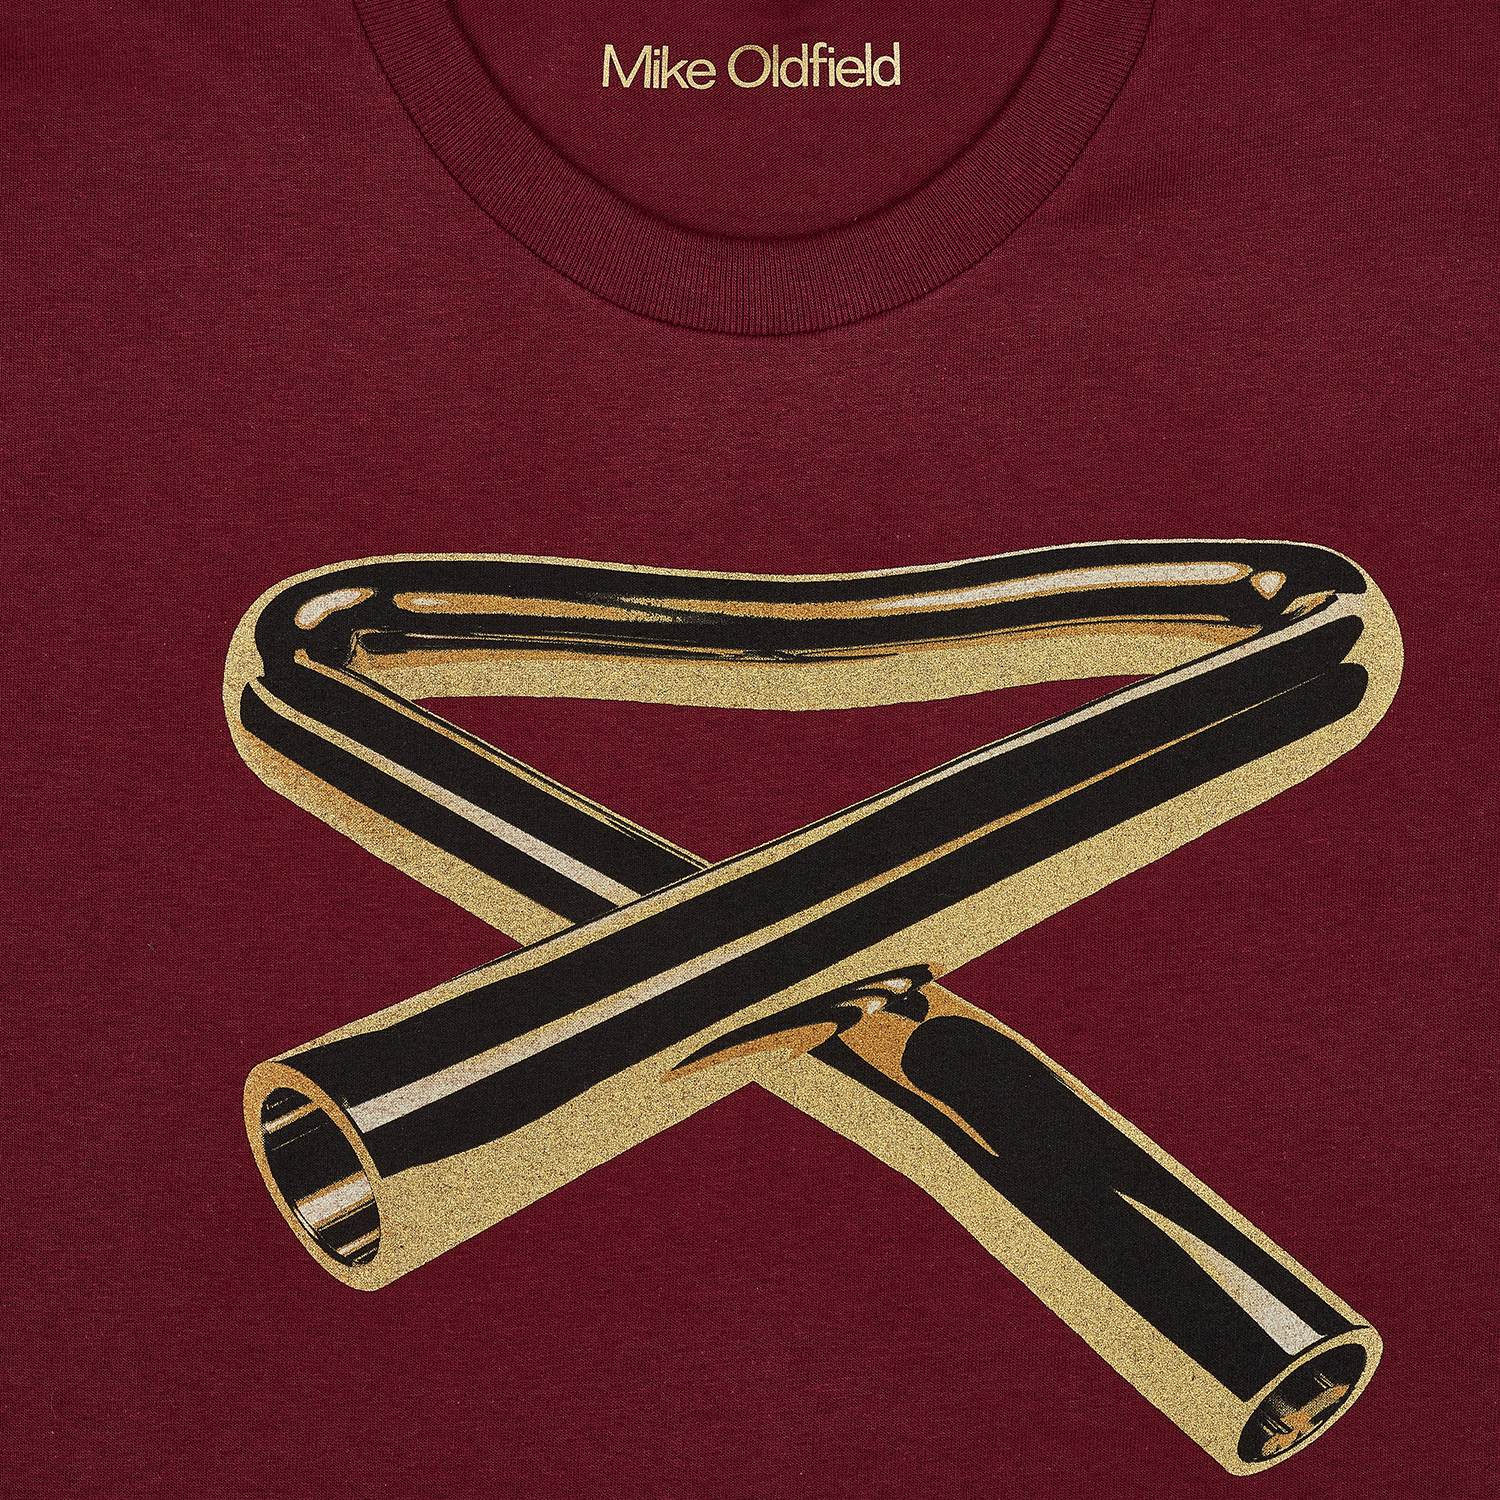 Mike Oldfield - Official Tubular Bells Anniversary T-shirt (Maroon)